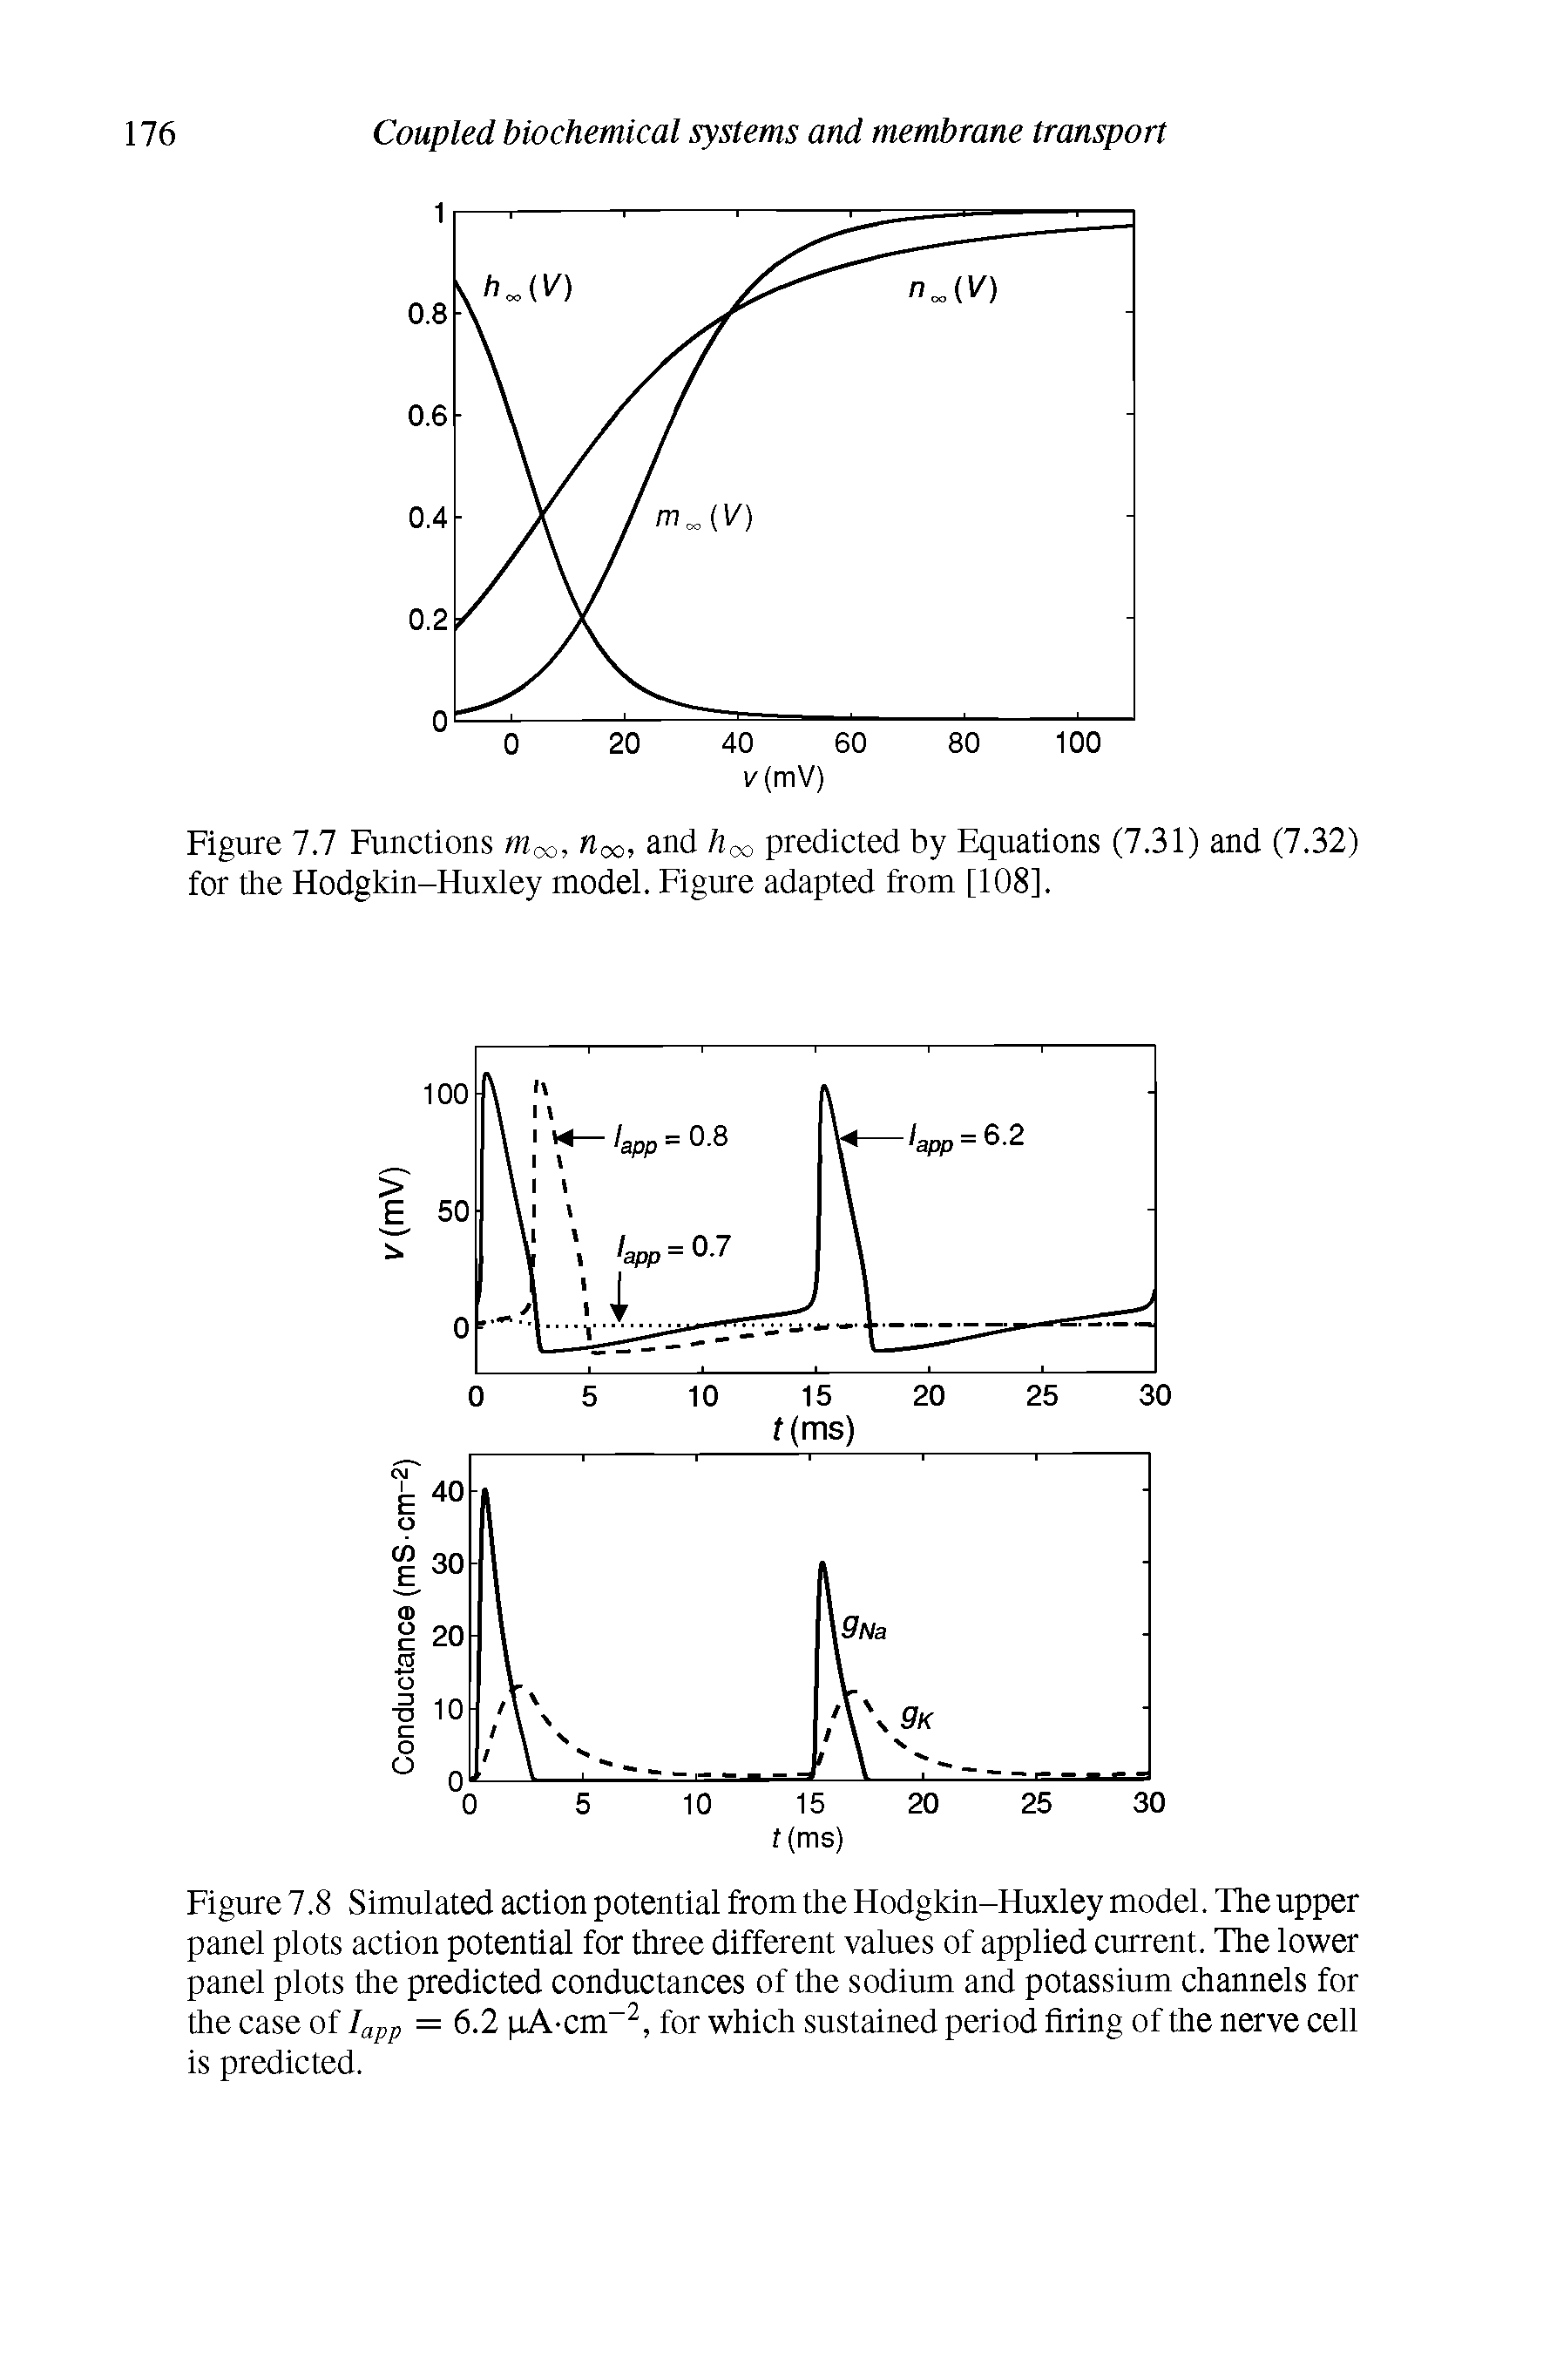 Figure 7.7 Functions m< >, n00, and /too predicted by Equations (7.31) and (7.32) for the Hodgkin-Huxley model. Figure adapted from [108],...